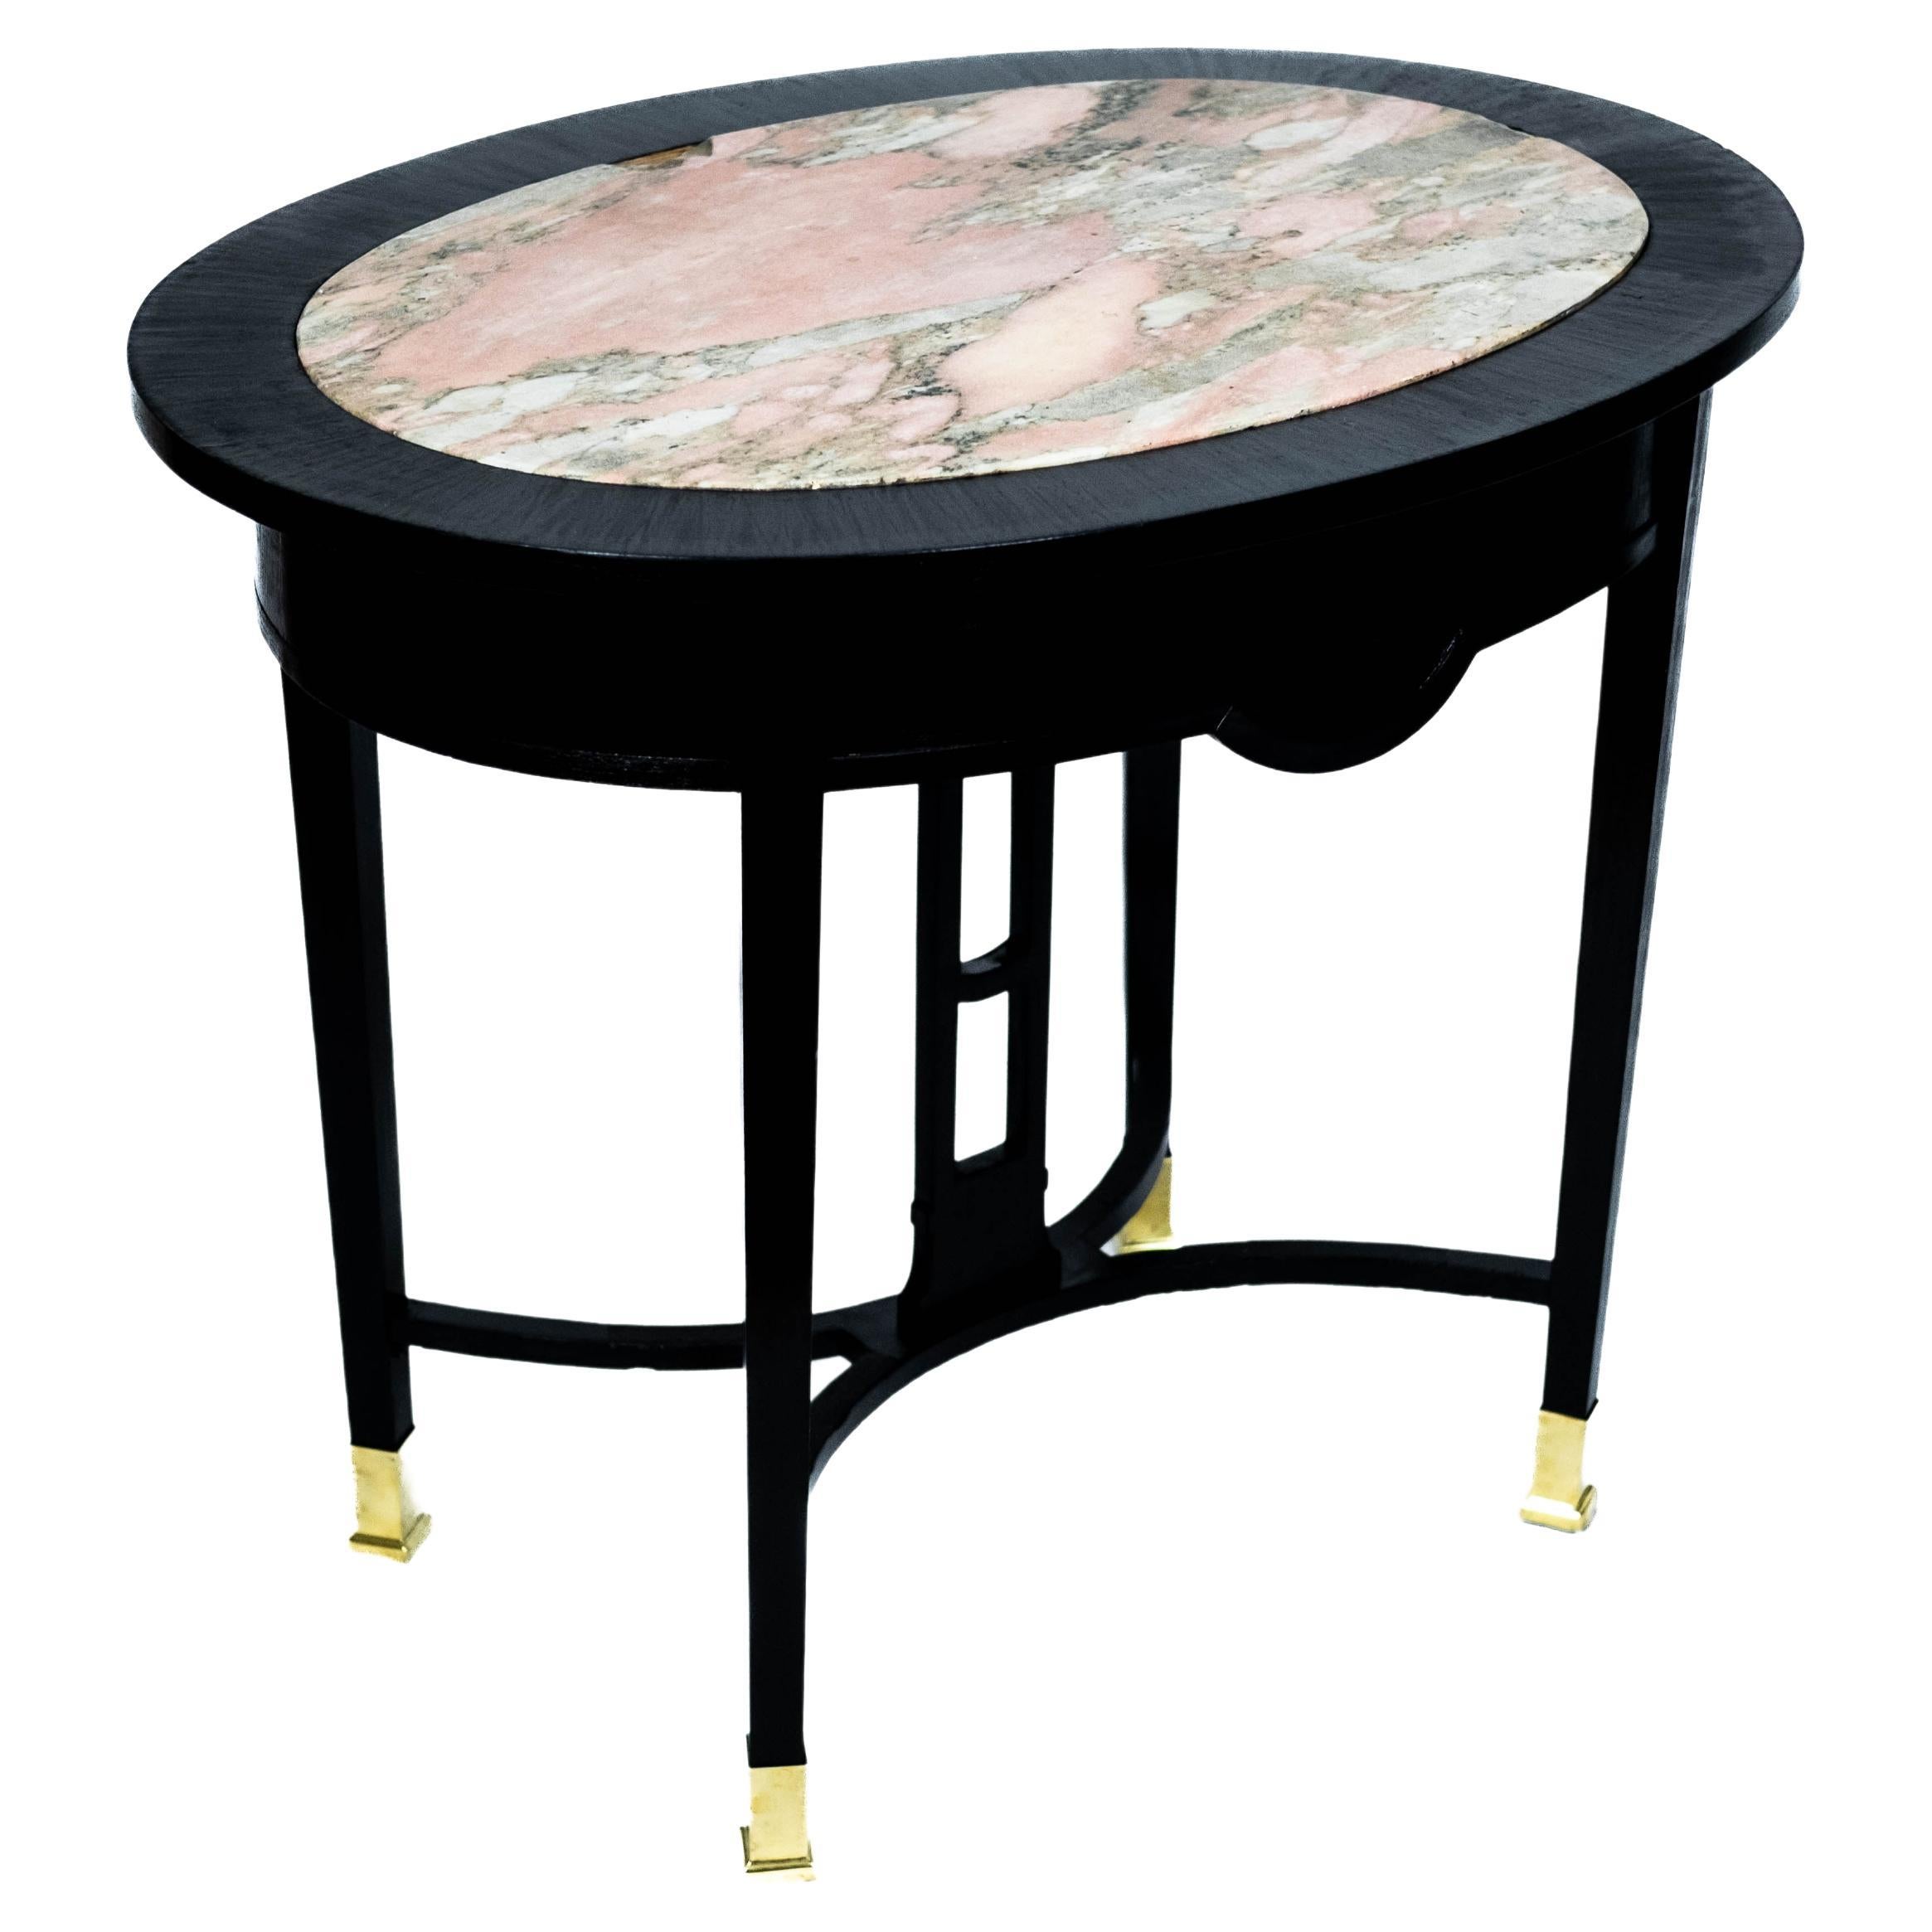 Small black Art Nouveau Table with Marble-Plate and Brass-Fittings (circa 1910) For Sale